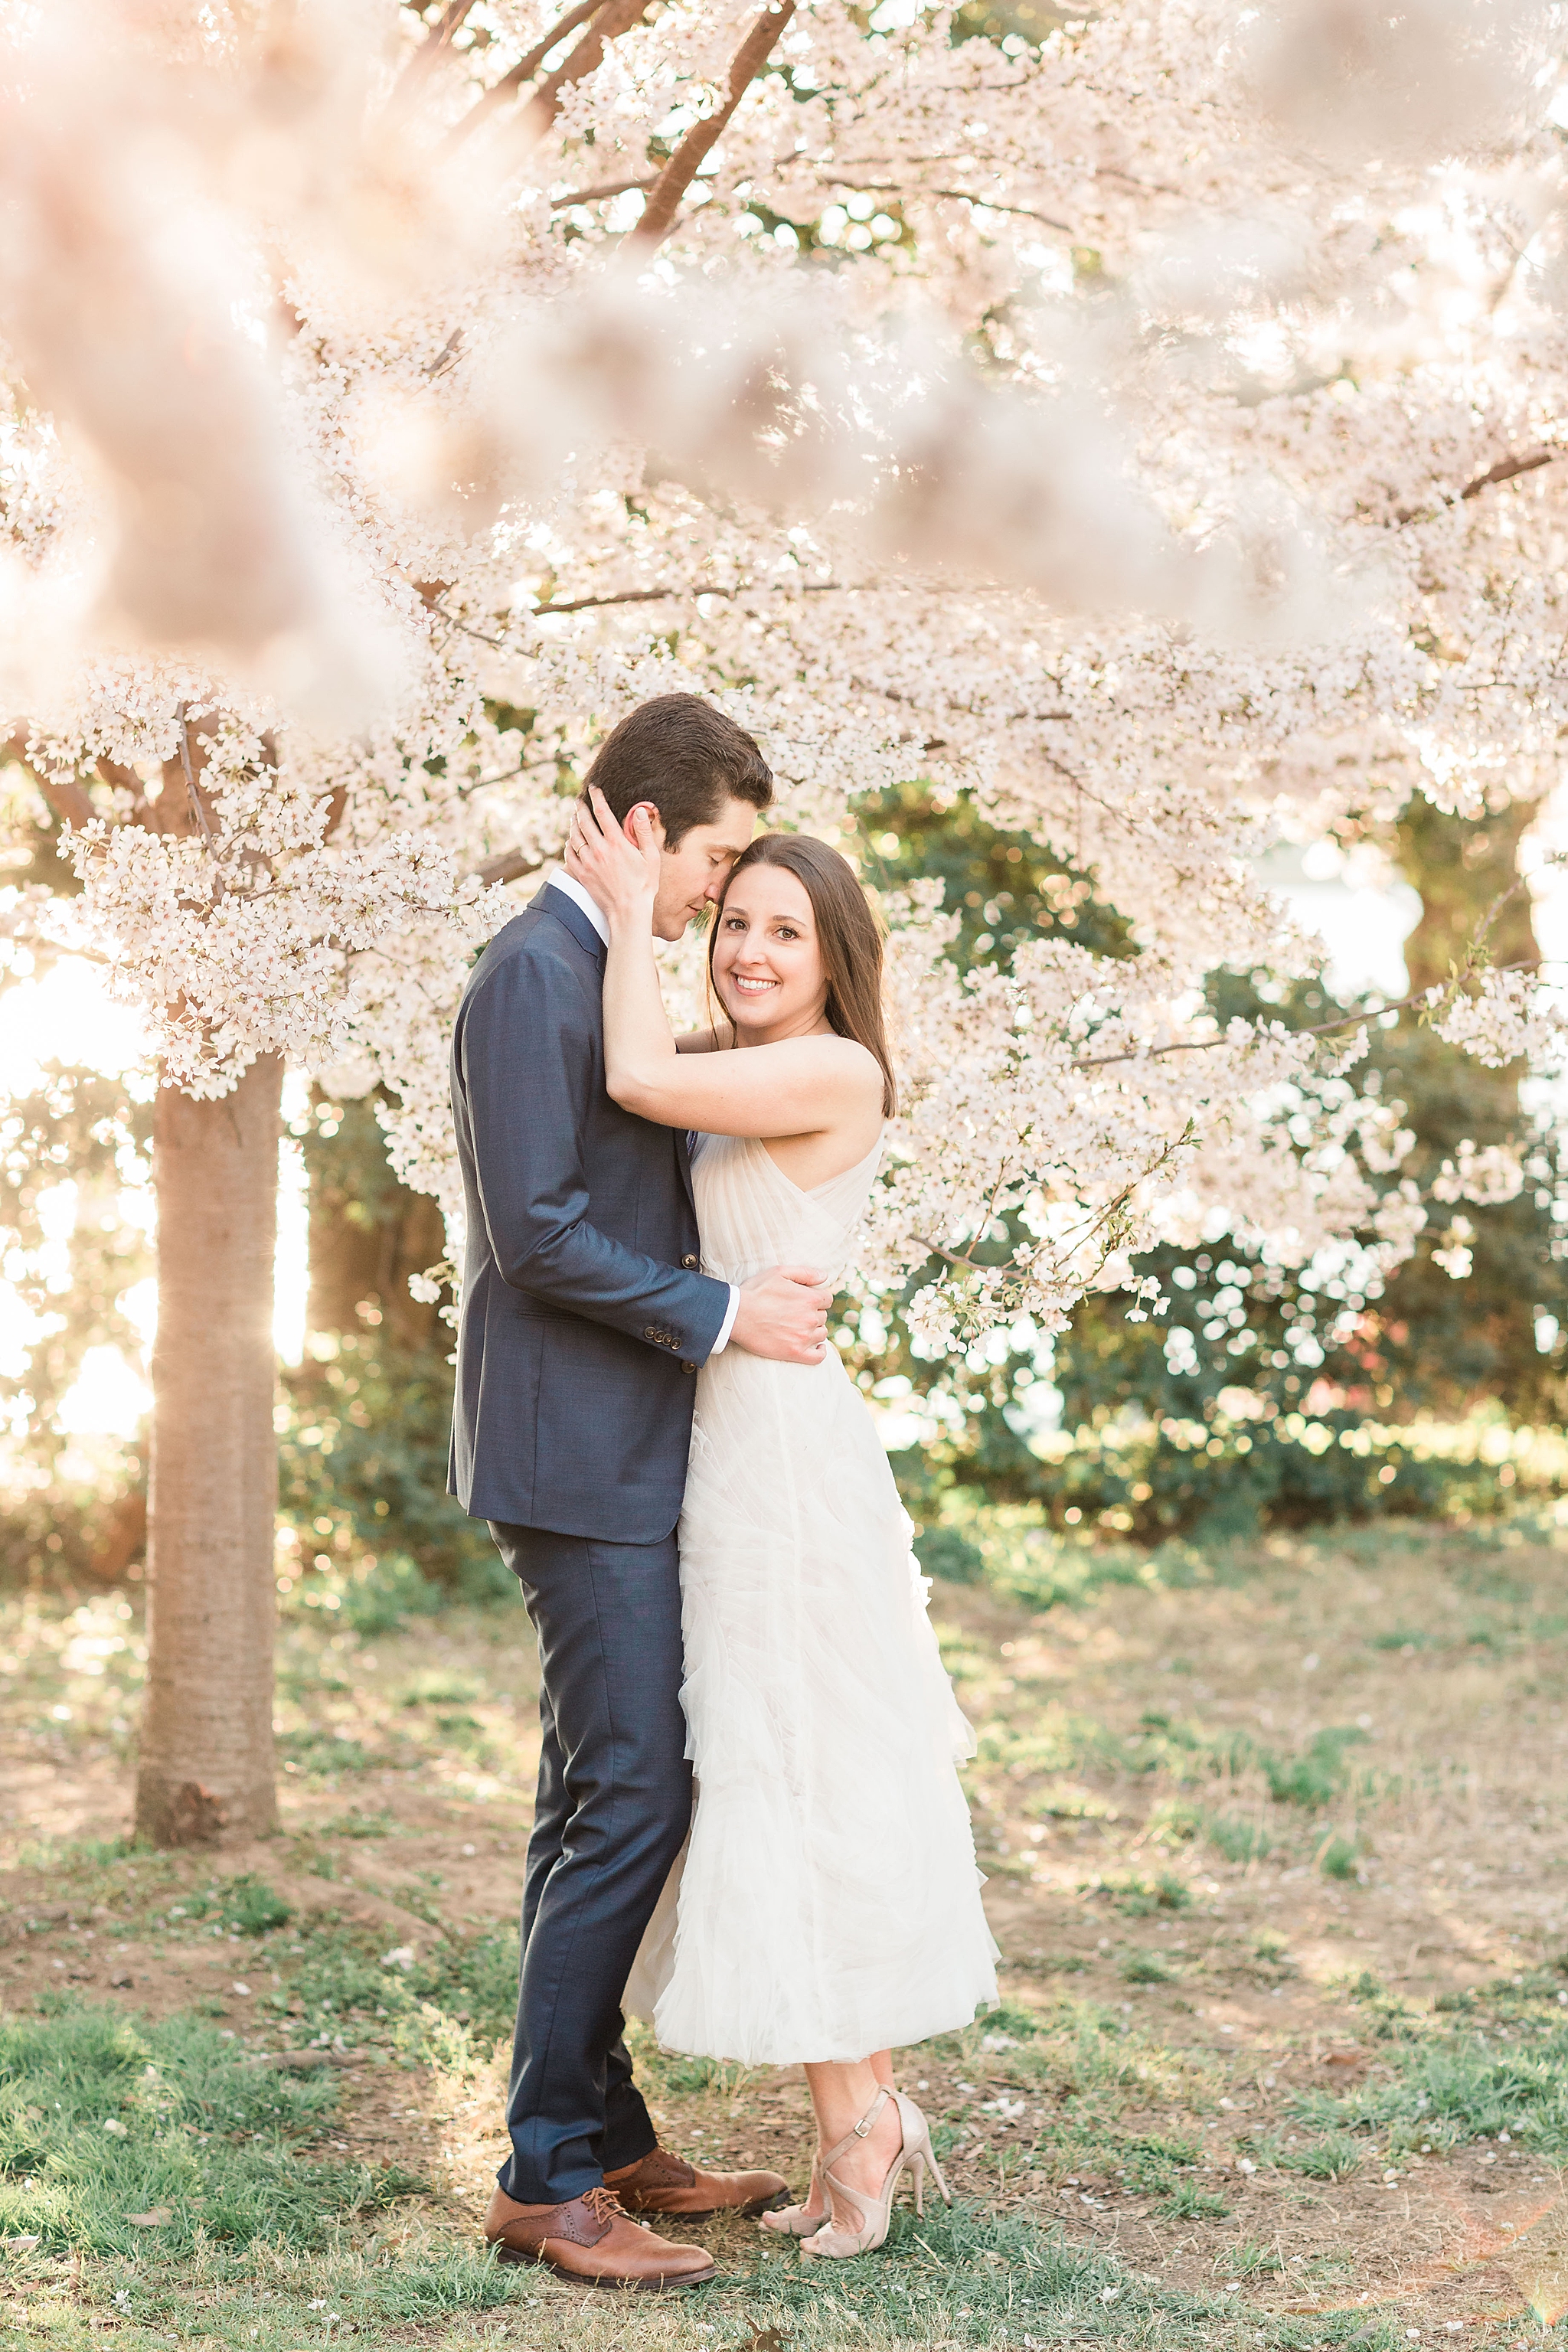 A stylish cherry blossom engagement session at the Tidal Basin in Washington, DC during peak bloom.